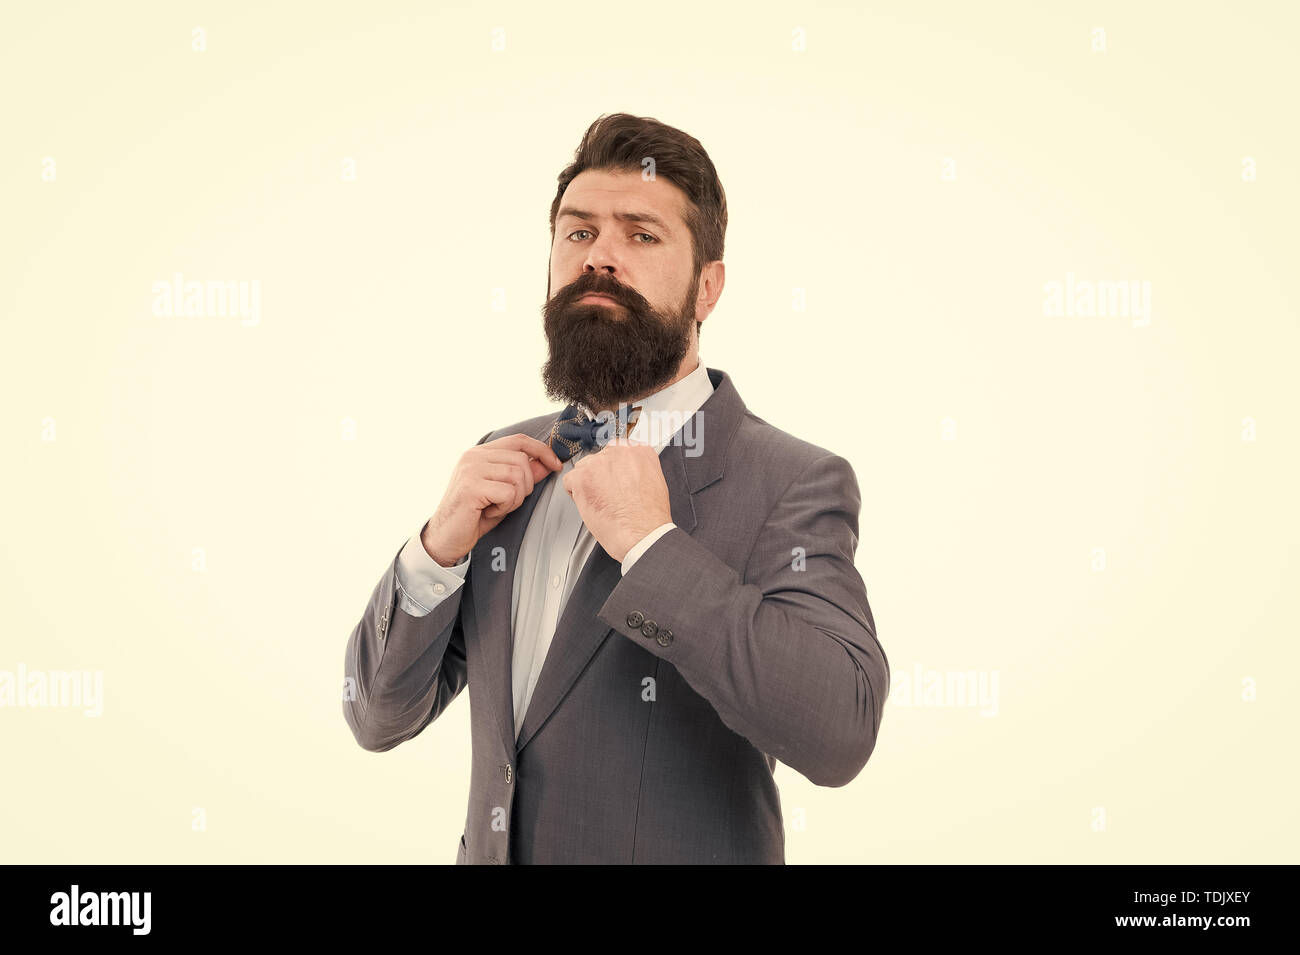 Formal outfit. Take good care of suit. Elegancy and male style. Businessman  or host fashionable outfit grey background. Fashion concept. Classy style.  Man bearded hipster wear classic suit outfit Stock Photo by ©